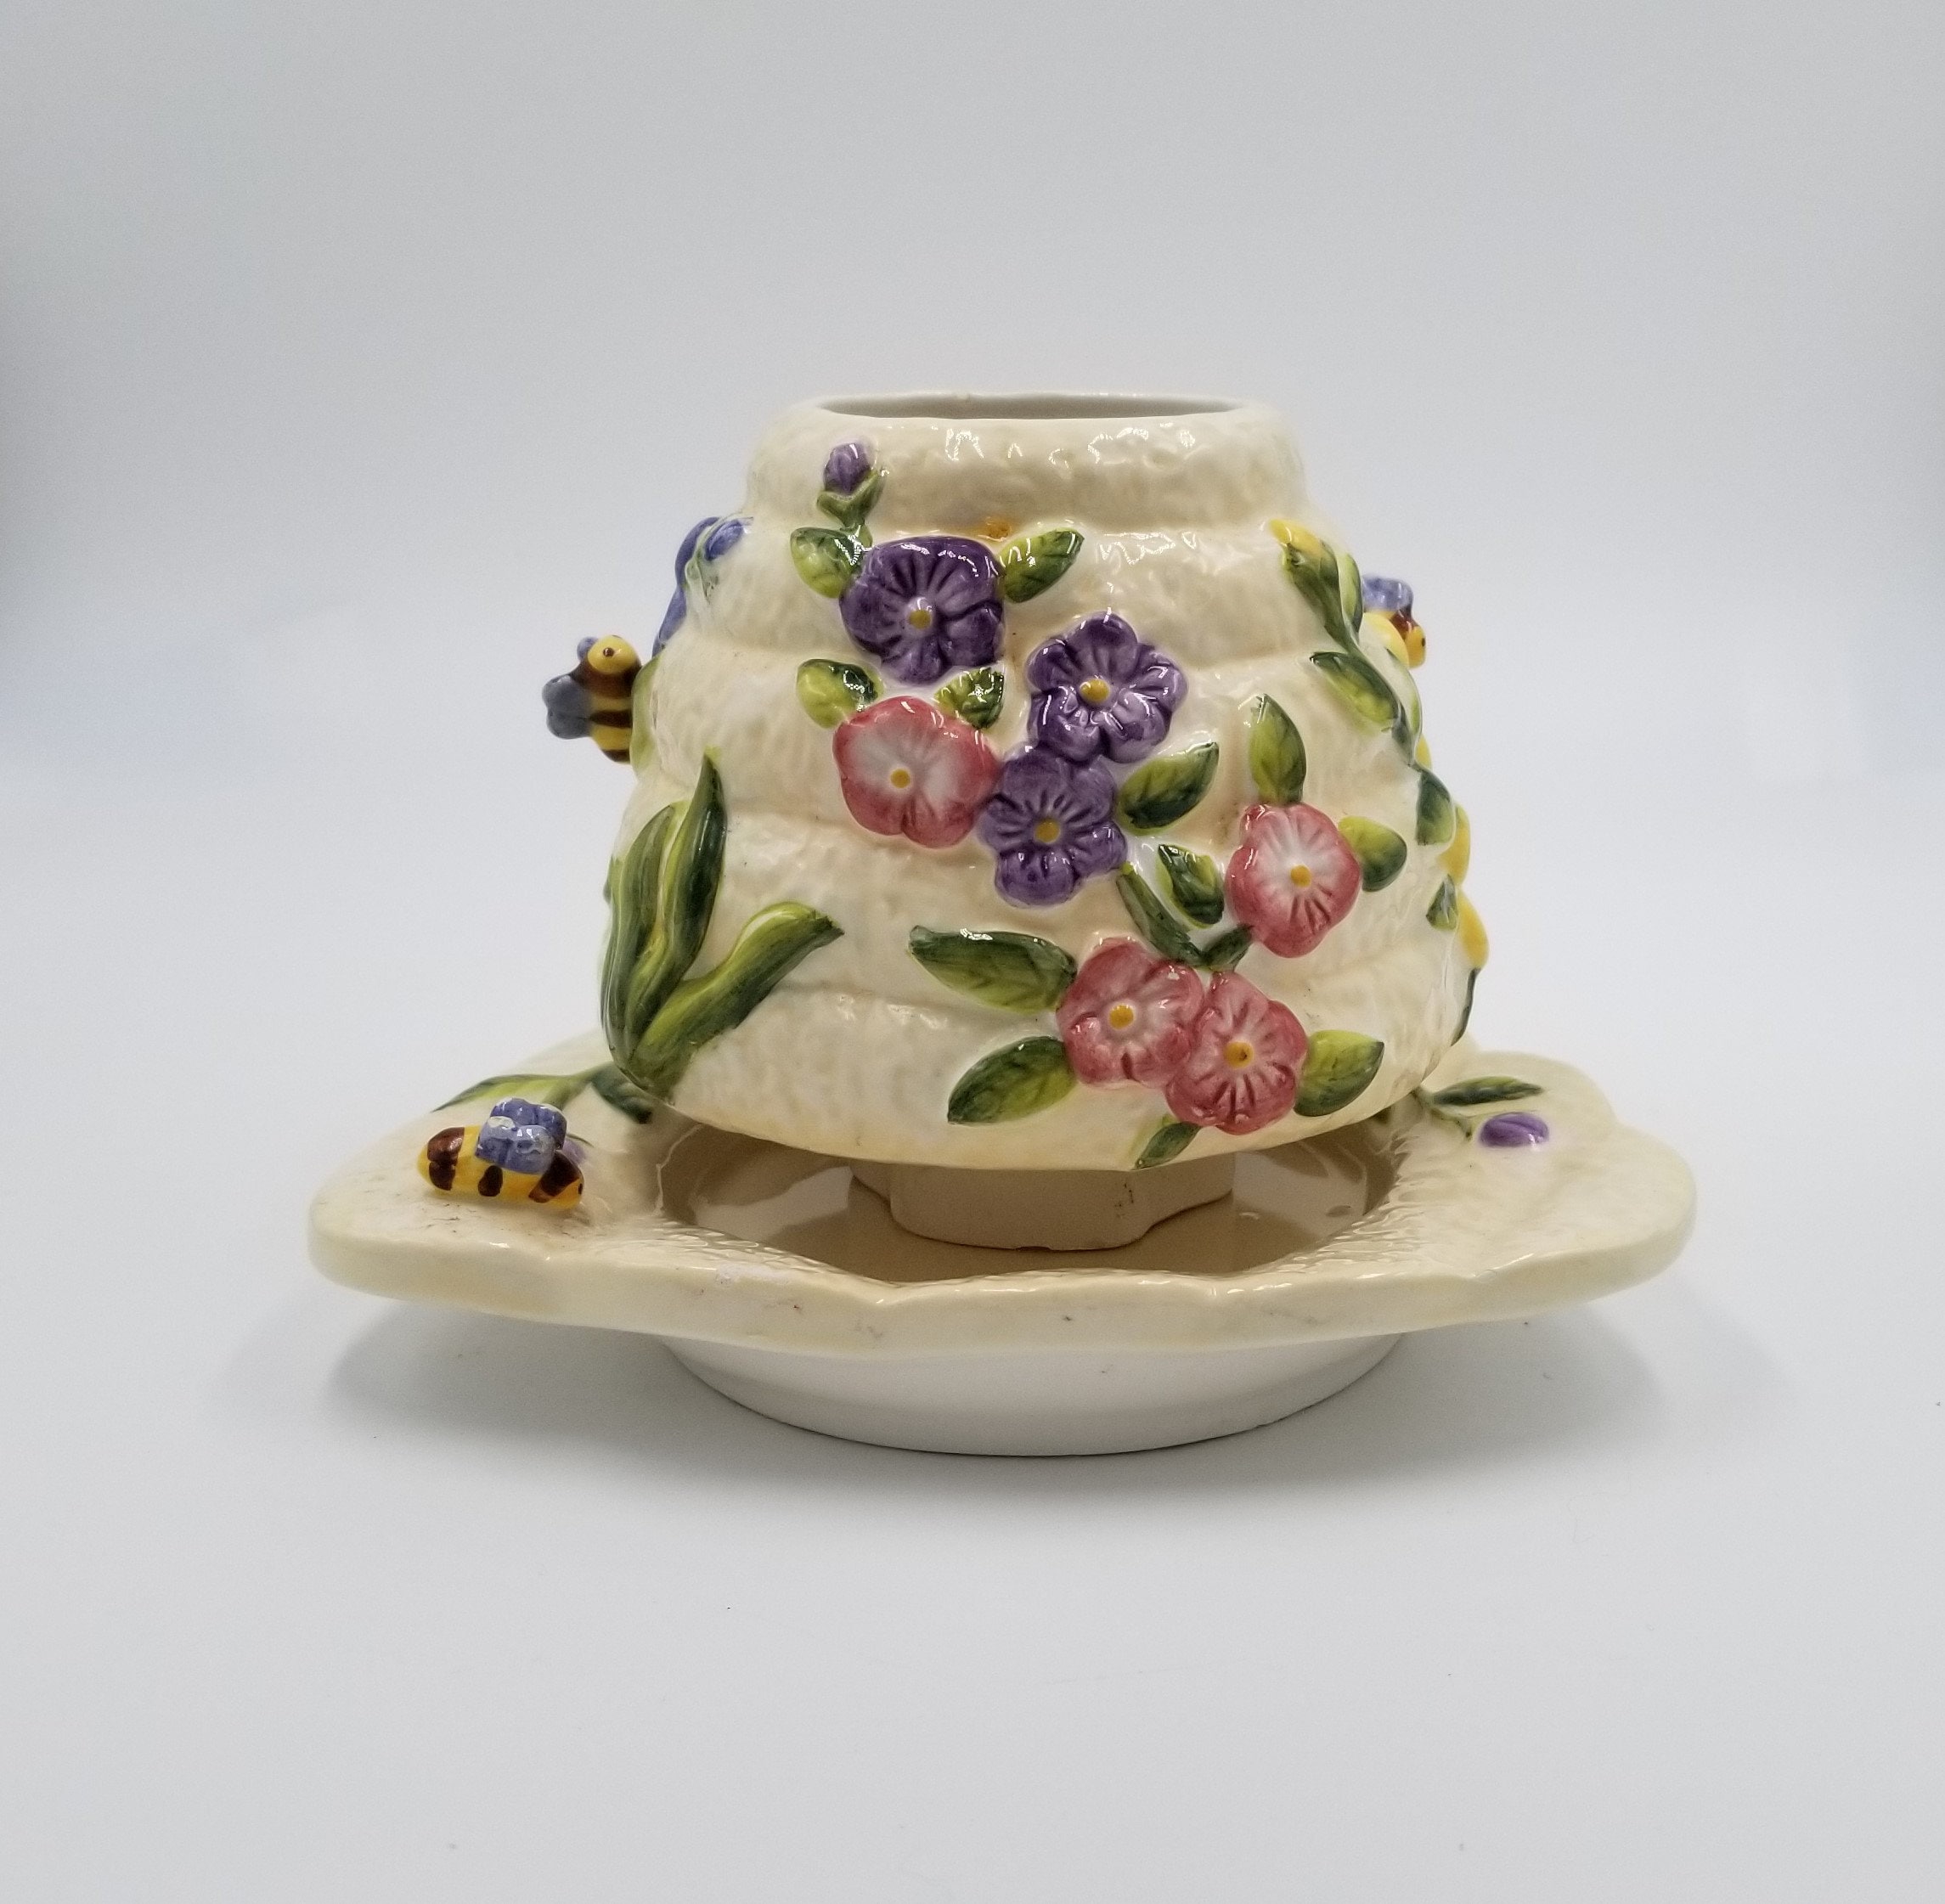 Home Interiors & Gifts 3-D Bumblebee Beehive Candle Jar Holder, Honey Hive,  Glazed Ceramic ,candle Holder, Flowers, Candles, Bzzz -  Canada